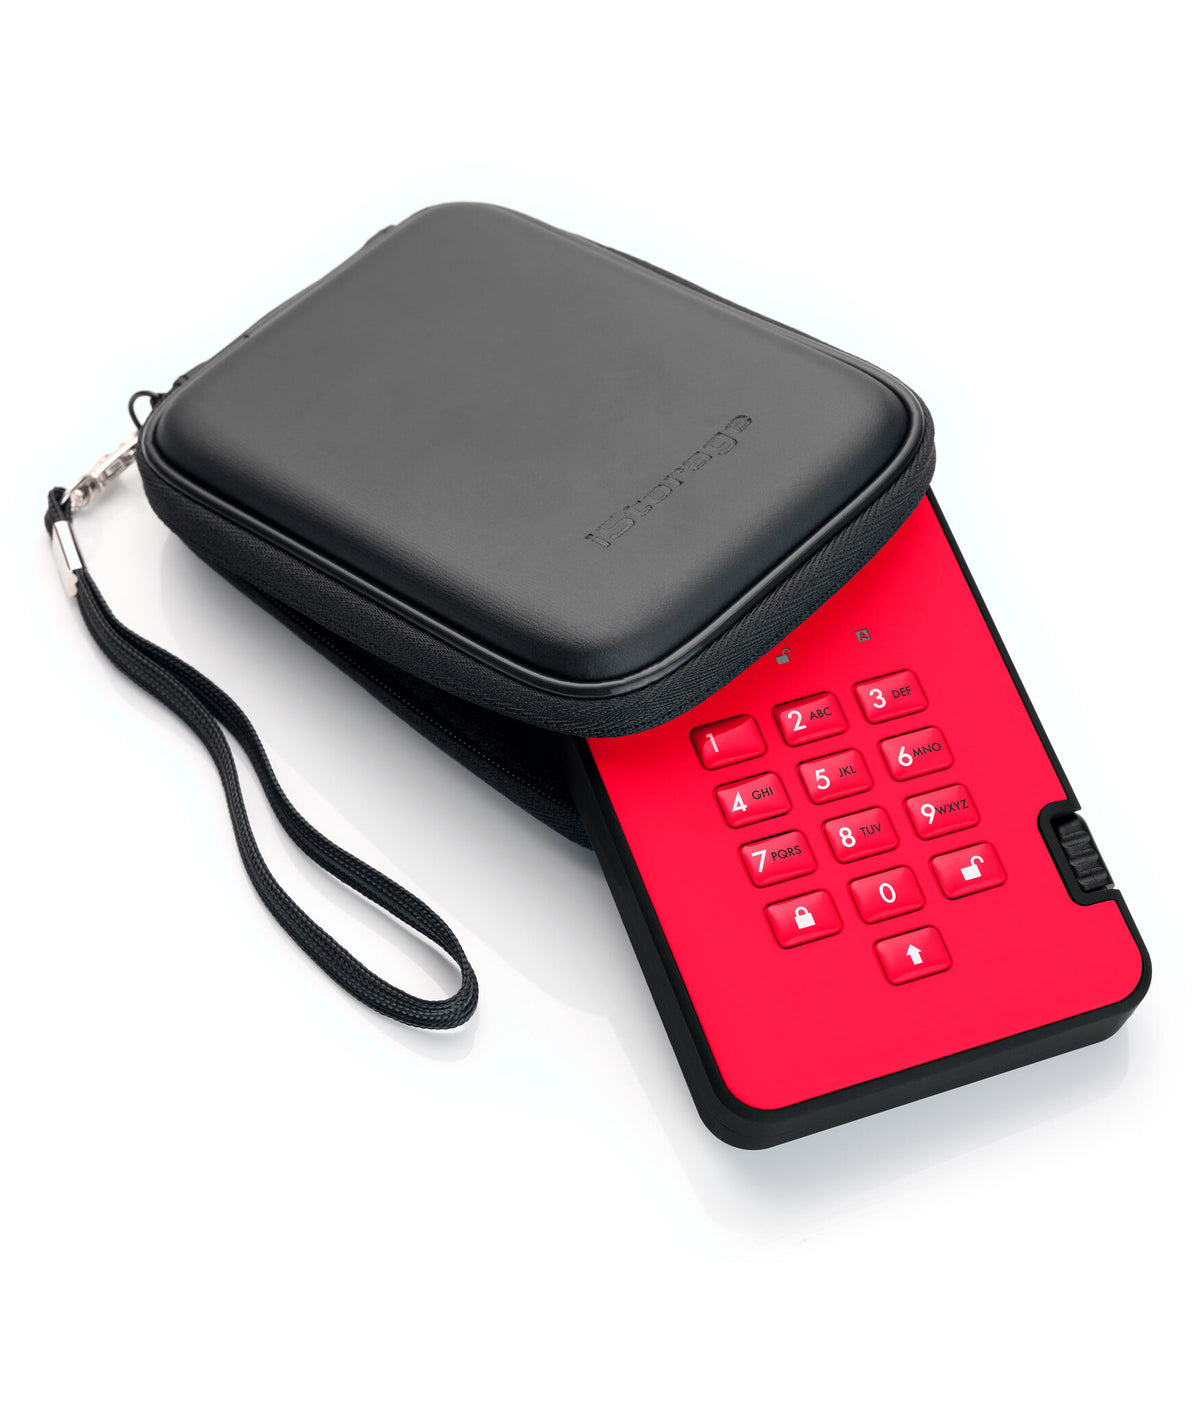 iStorage diskAshur2 - Secure Encrypted External solid state drive in Red - 128 GB